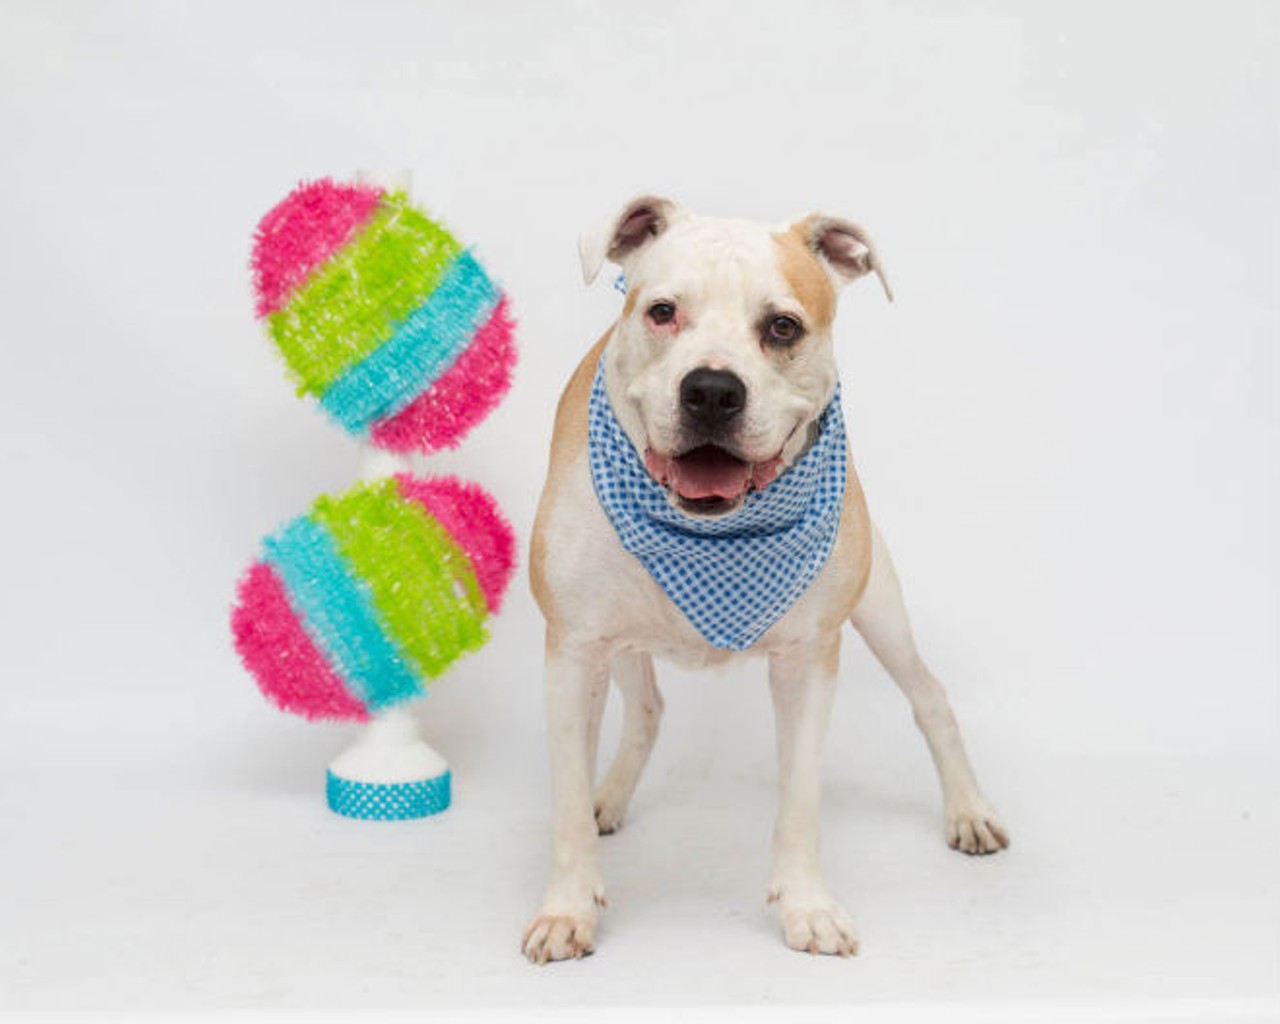 40 sweet photos of adoptable dogs at Orange County Animal Services